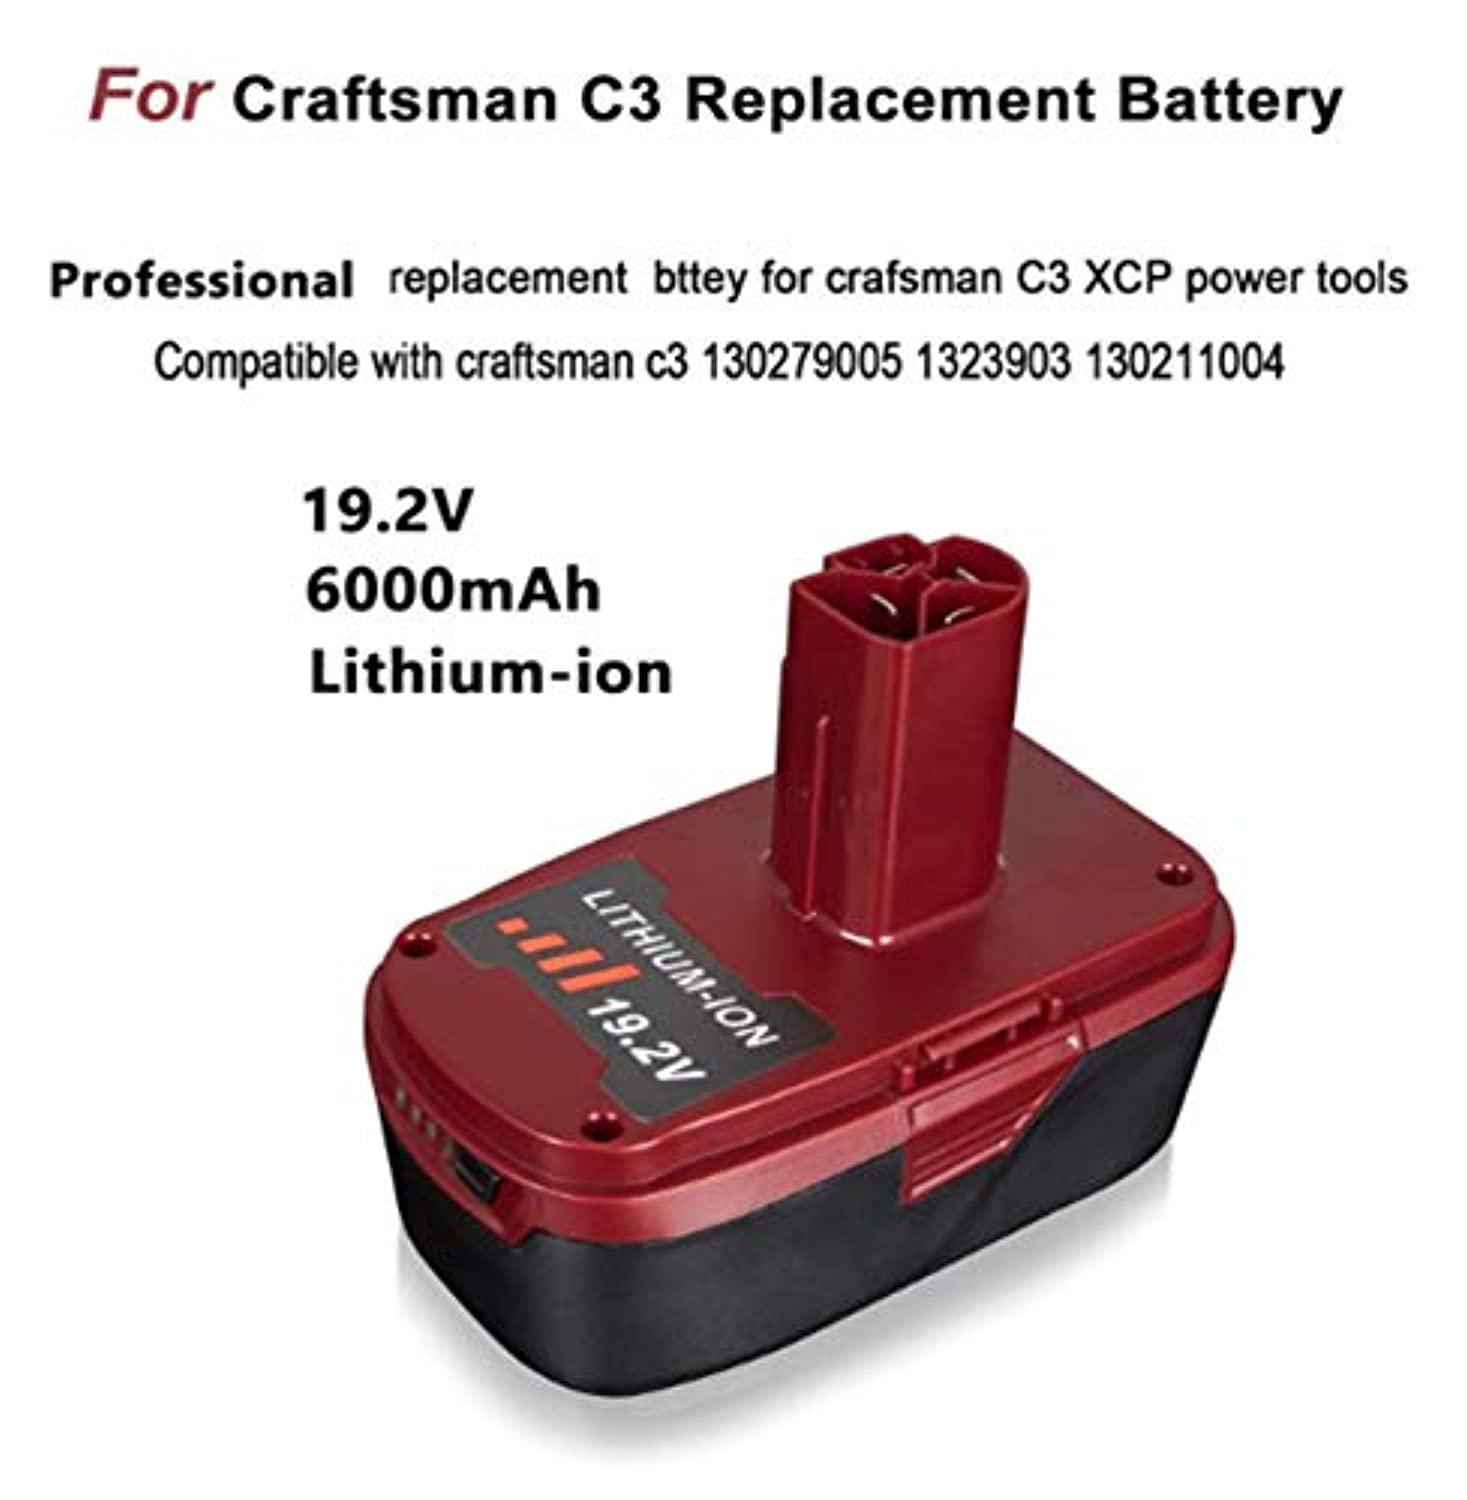 VANON 2pack c3 6.0 replace for 19.2volt craftsman battery 130279005 c3 315.115410 315.11485 130239006 130235021 cordless drill tool